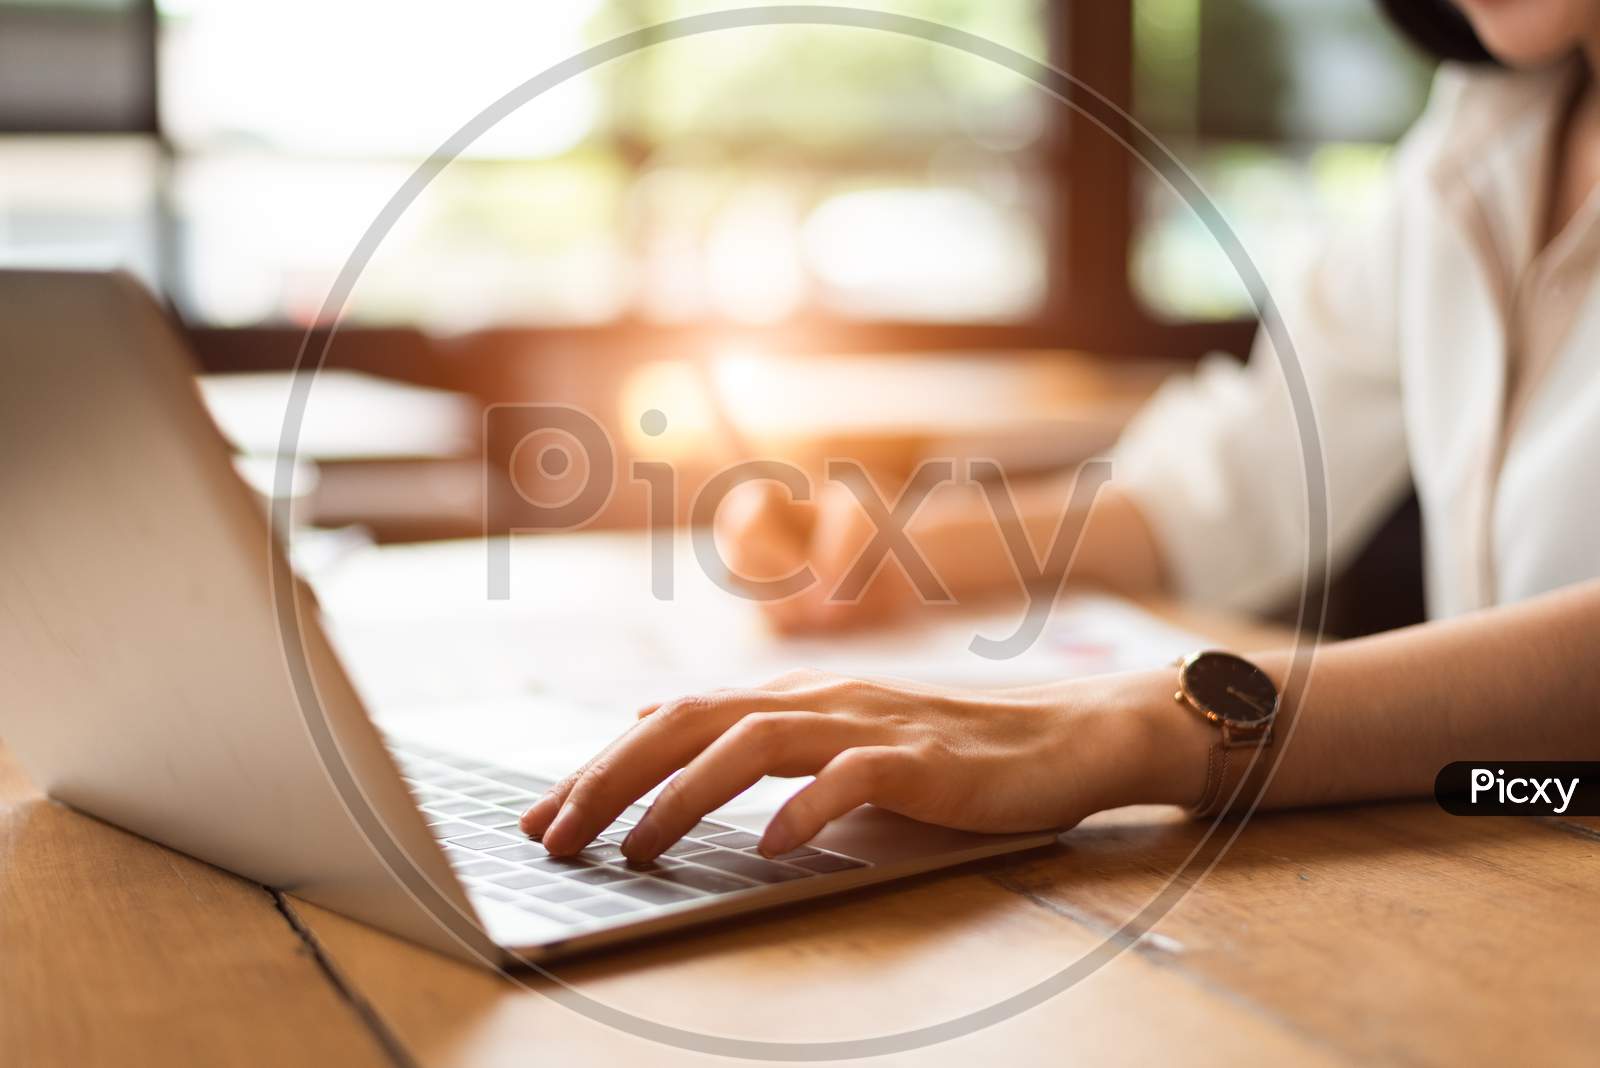 Close Up Of Woman Typing Keyboard On Laptop In Coffee Shop. People And Technology Concept. Freelance And Lifestyle Theme. Entrepreneur And Working Outside Office Theme.